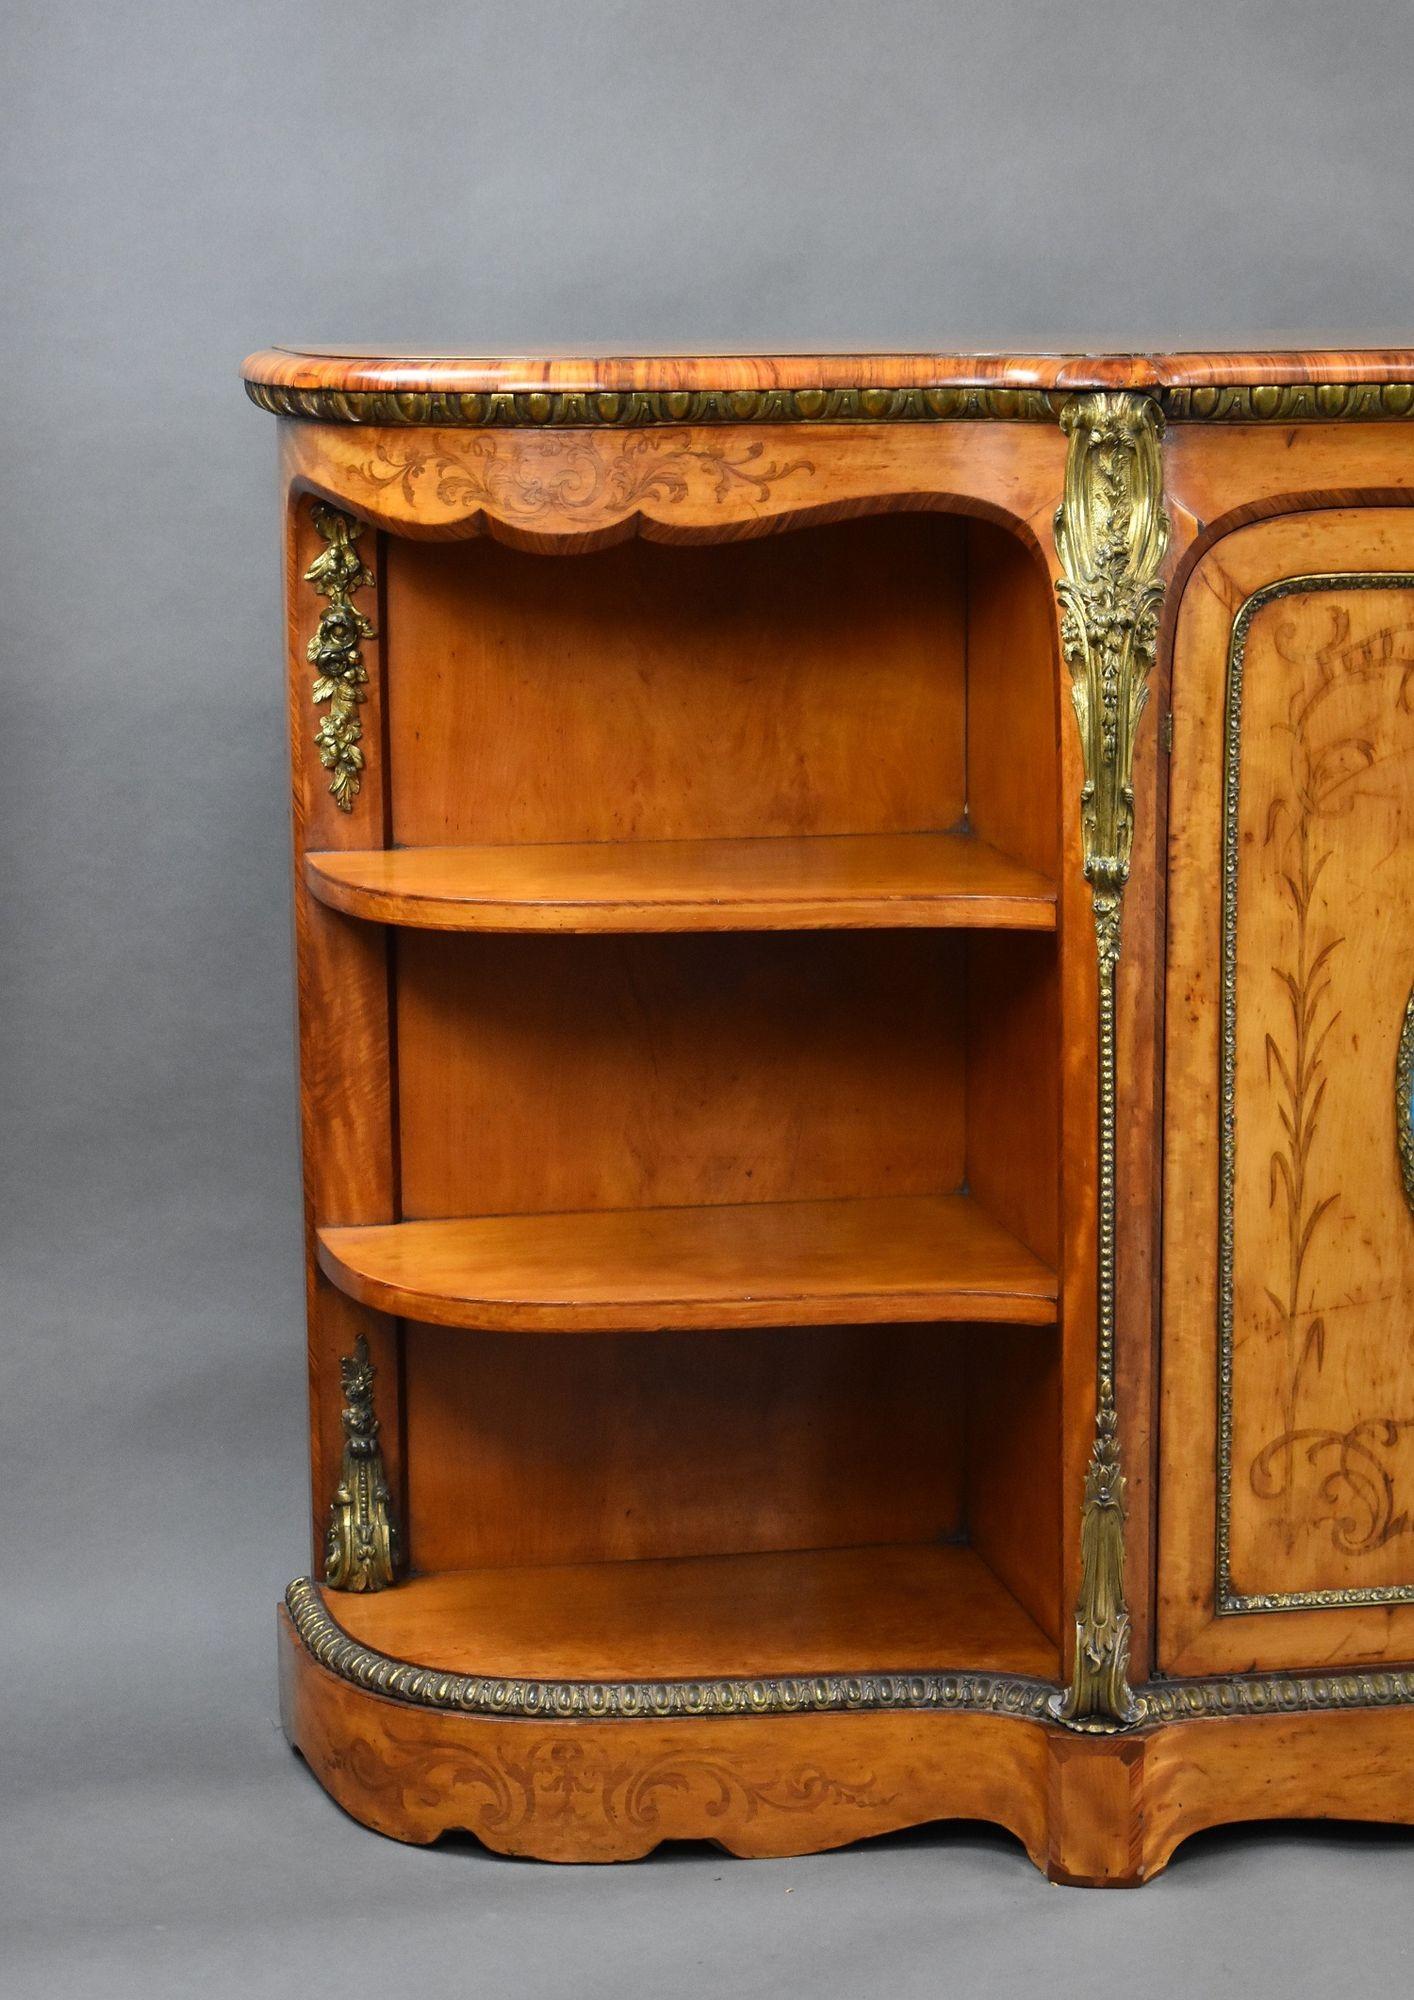 Antique Victorian burr walnut Credenza with open ends enclosing two shelves with two centre cupboards with sevres plaques on each enclosing two shelves. The credenza has decorative quality ormolu brass mounts on each corner and decorative brass to